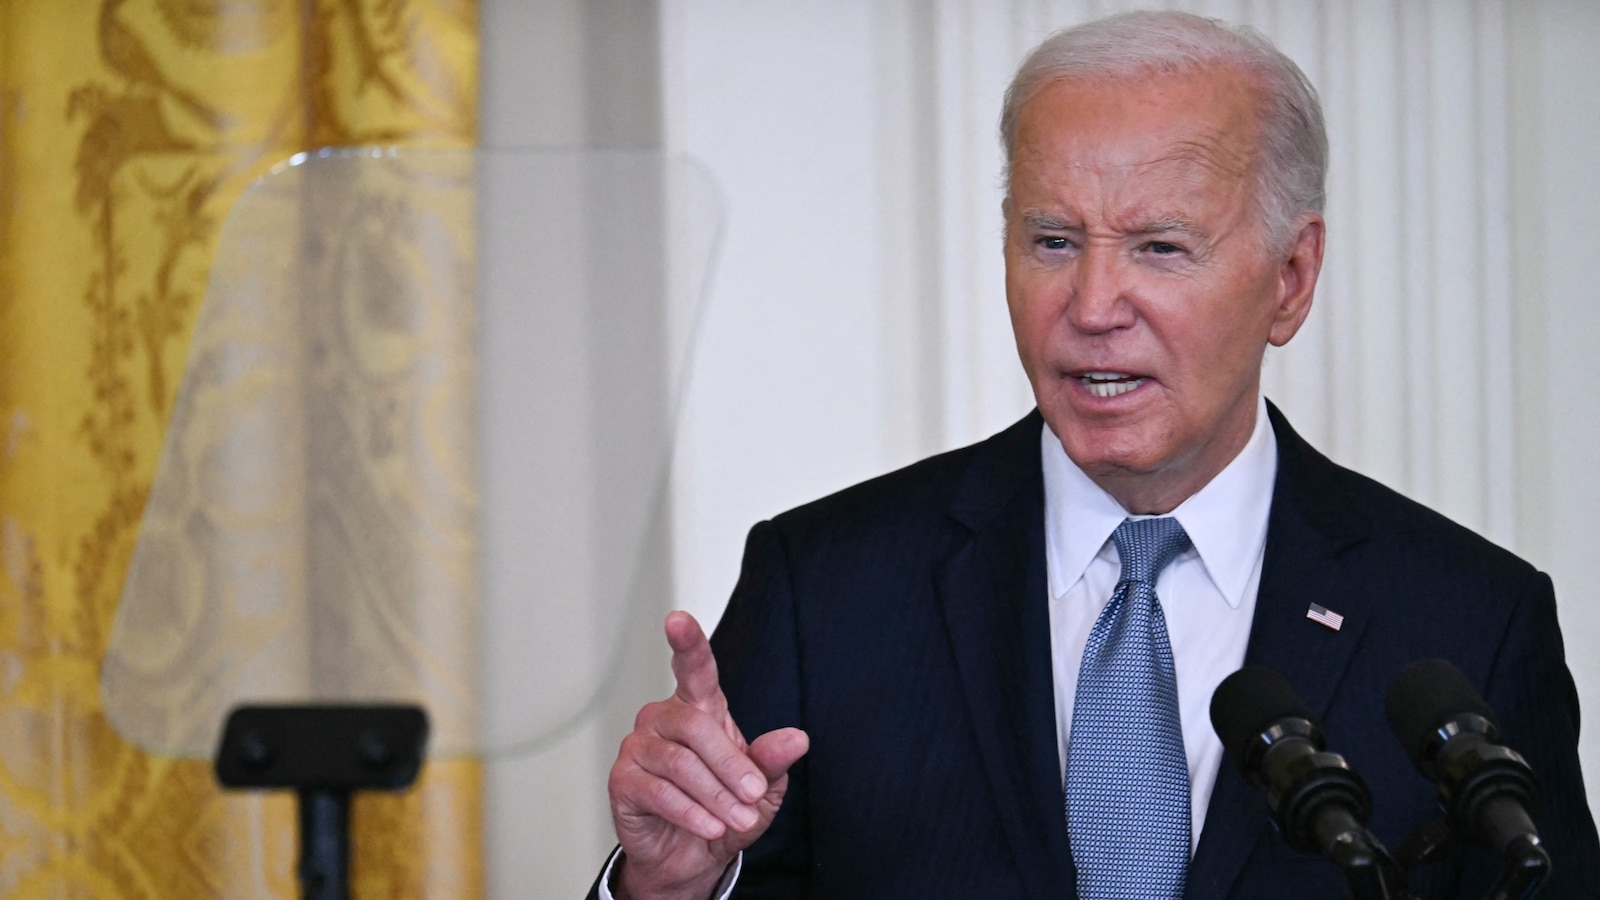 Biden told concerned Democratic governors he needs more sleep, sources say [Video]